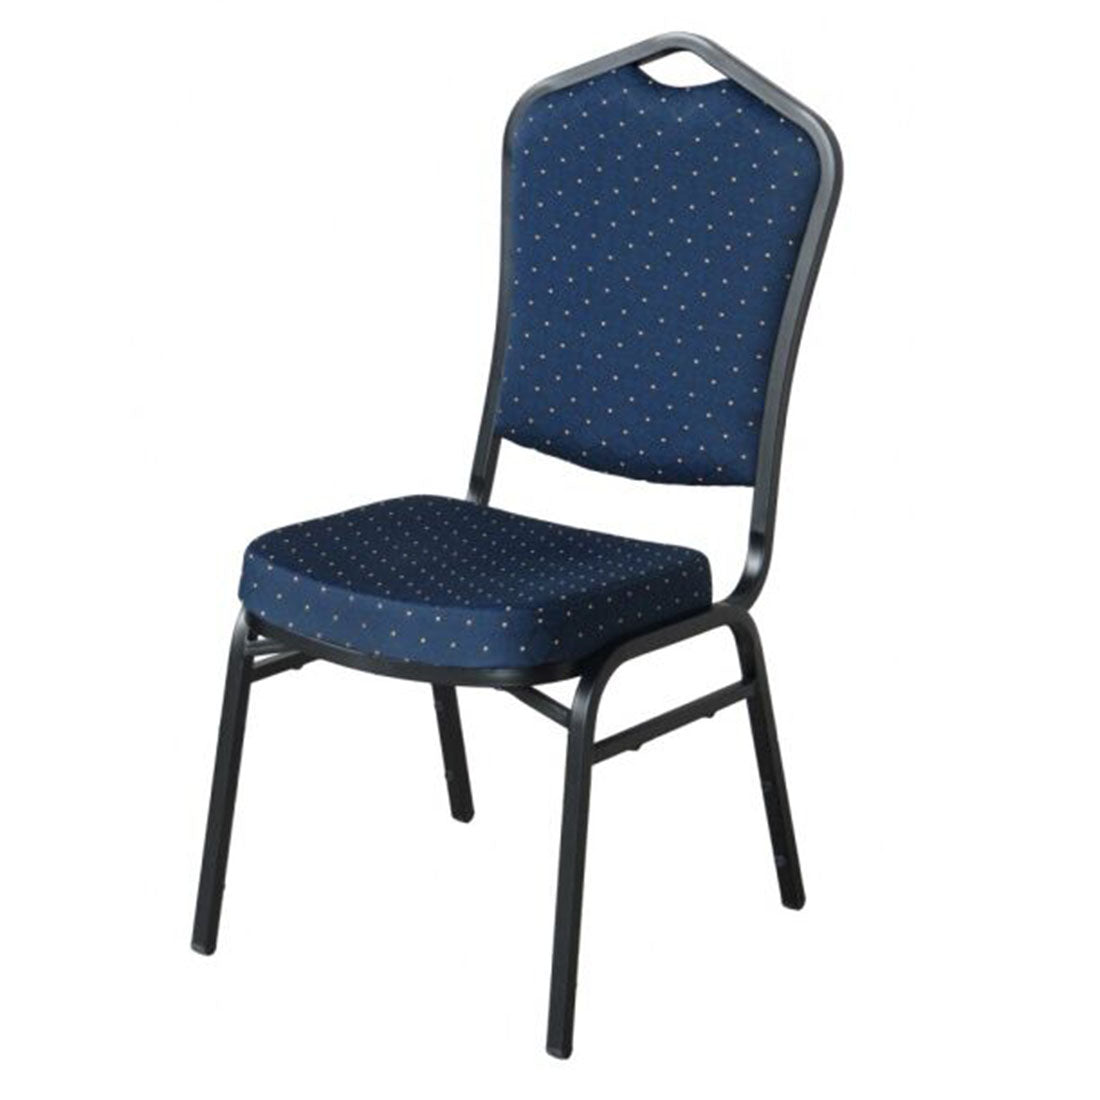 Function Chair - switchoffice.com.au